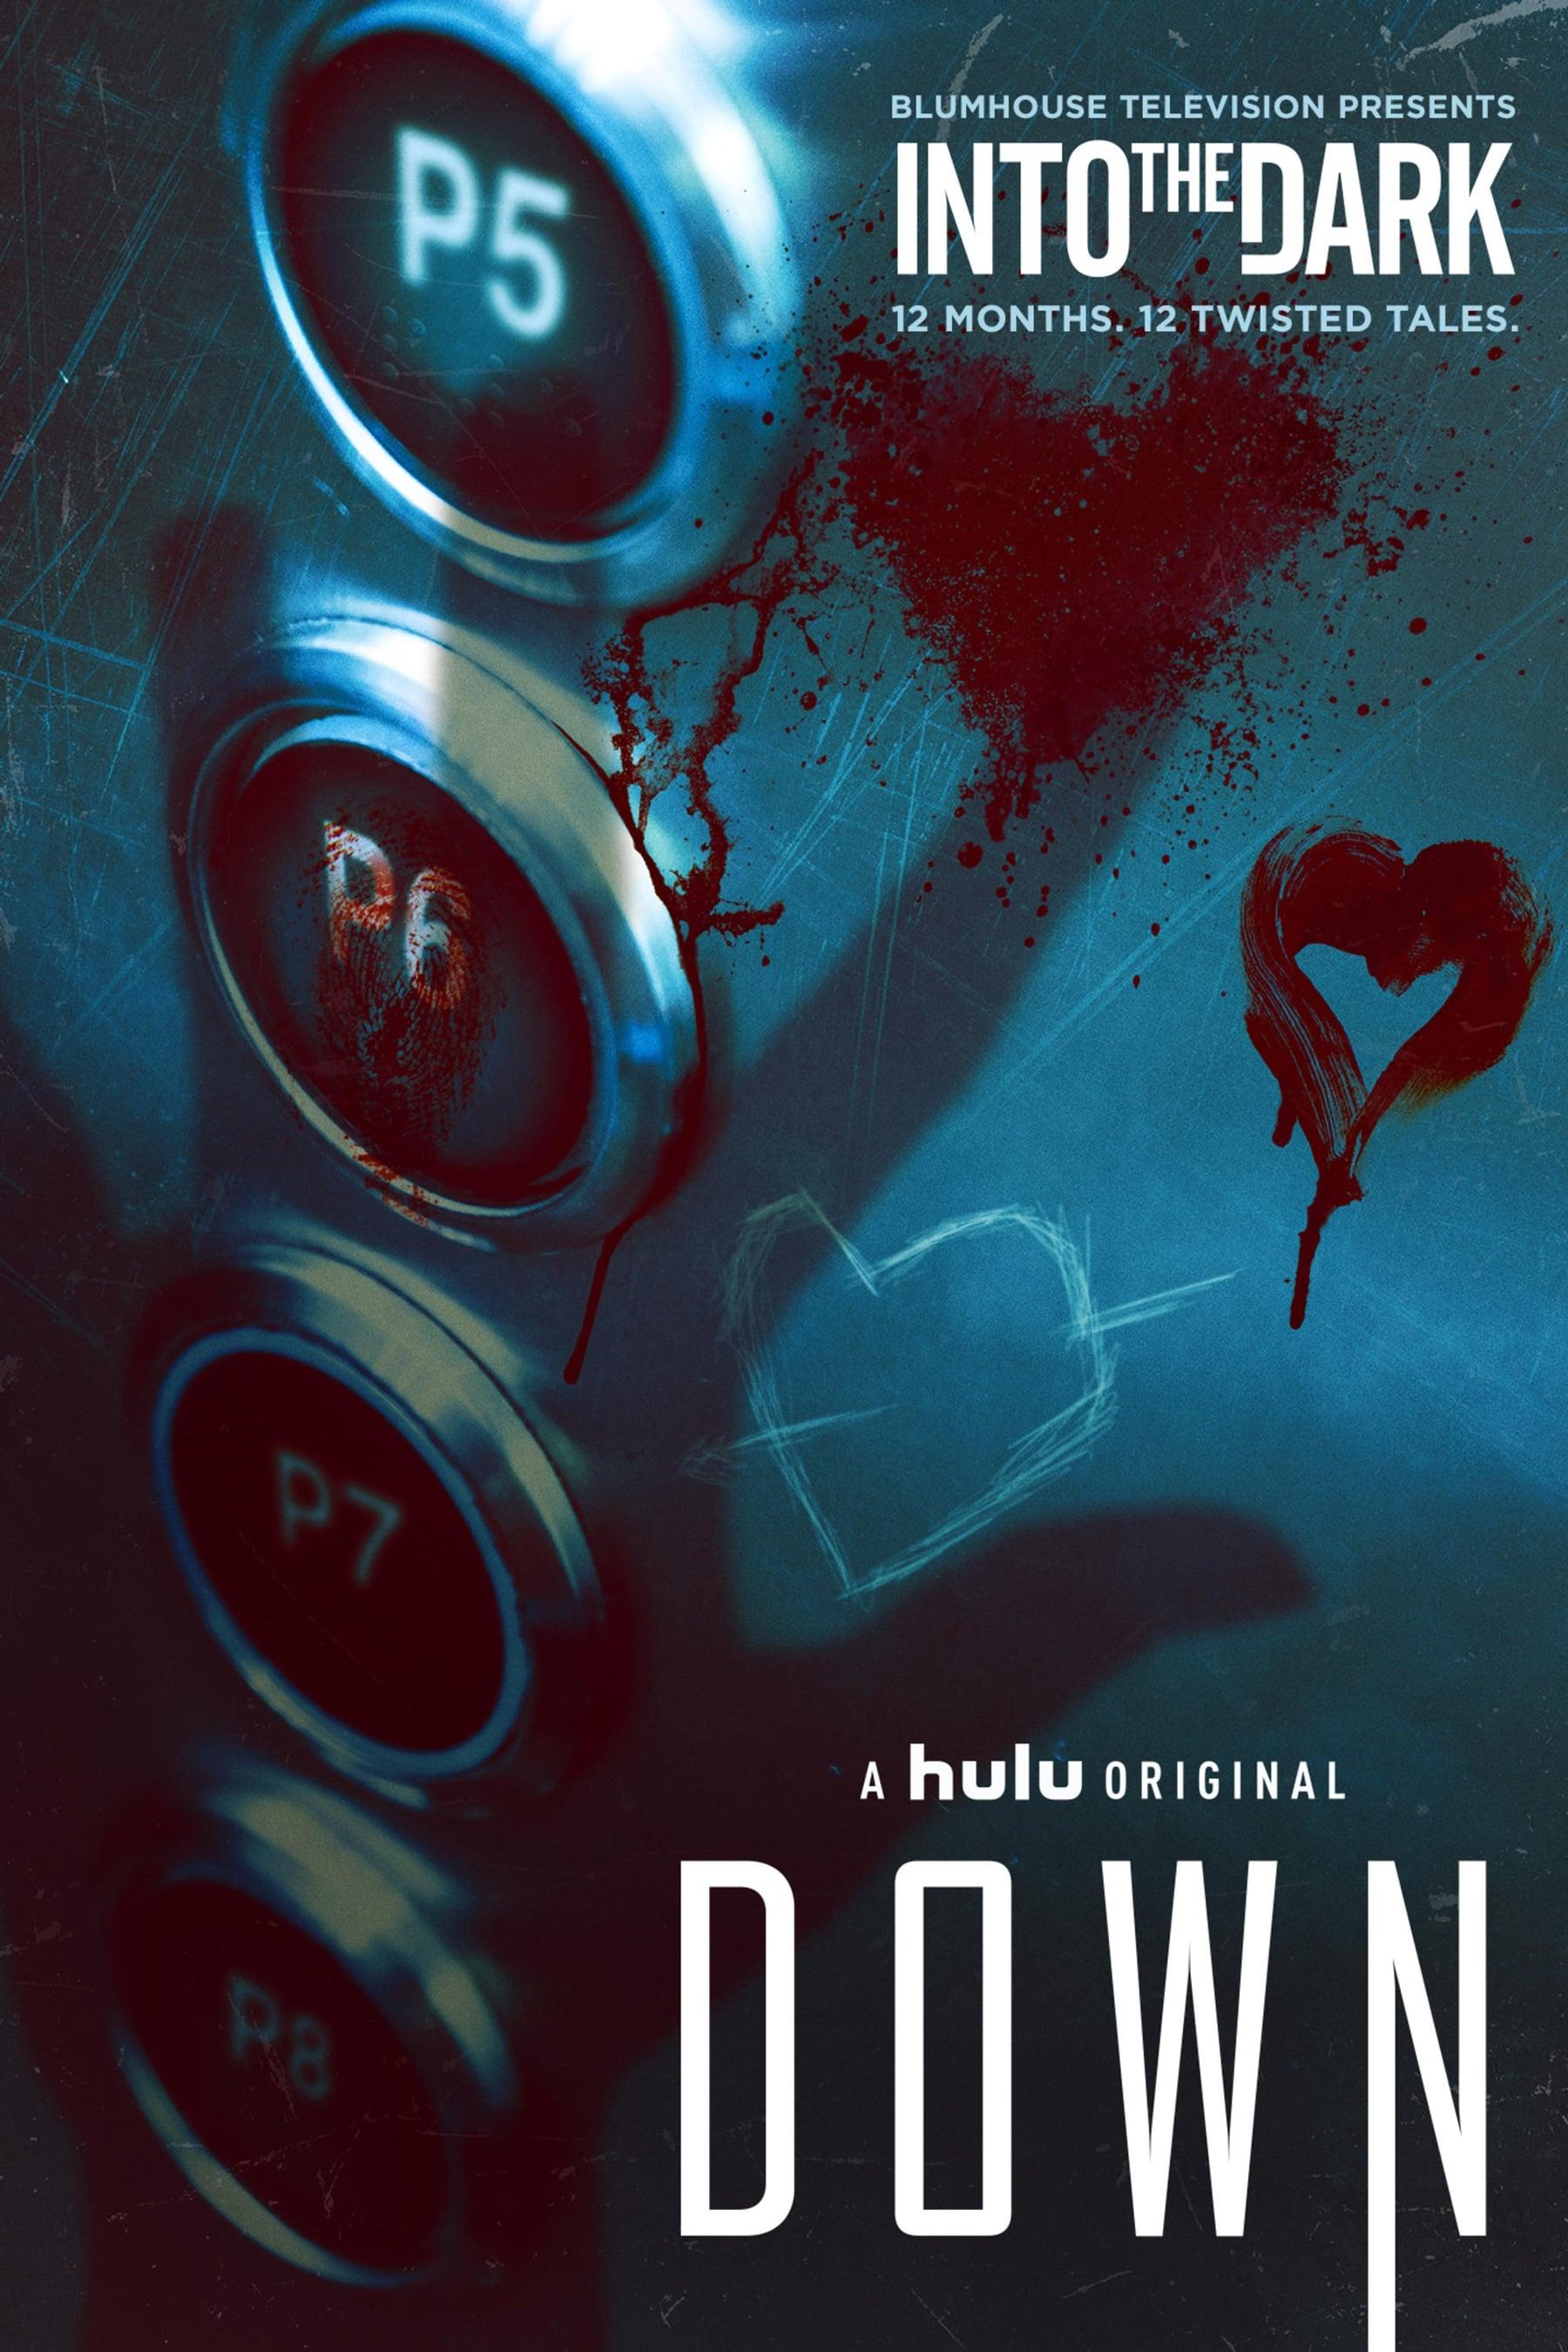 Down poster